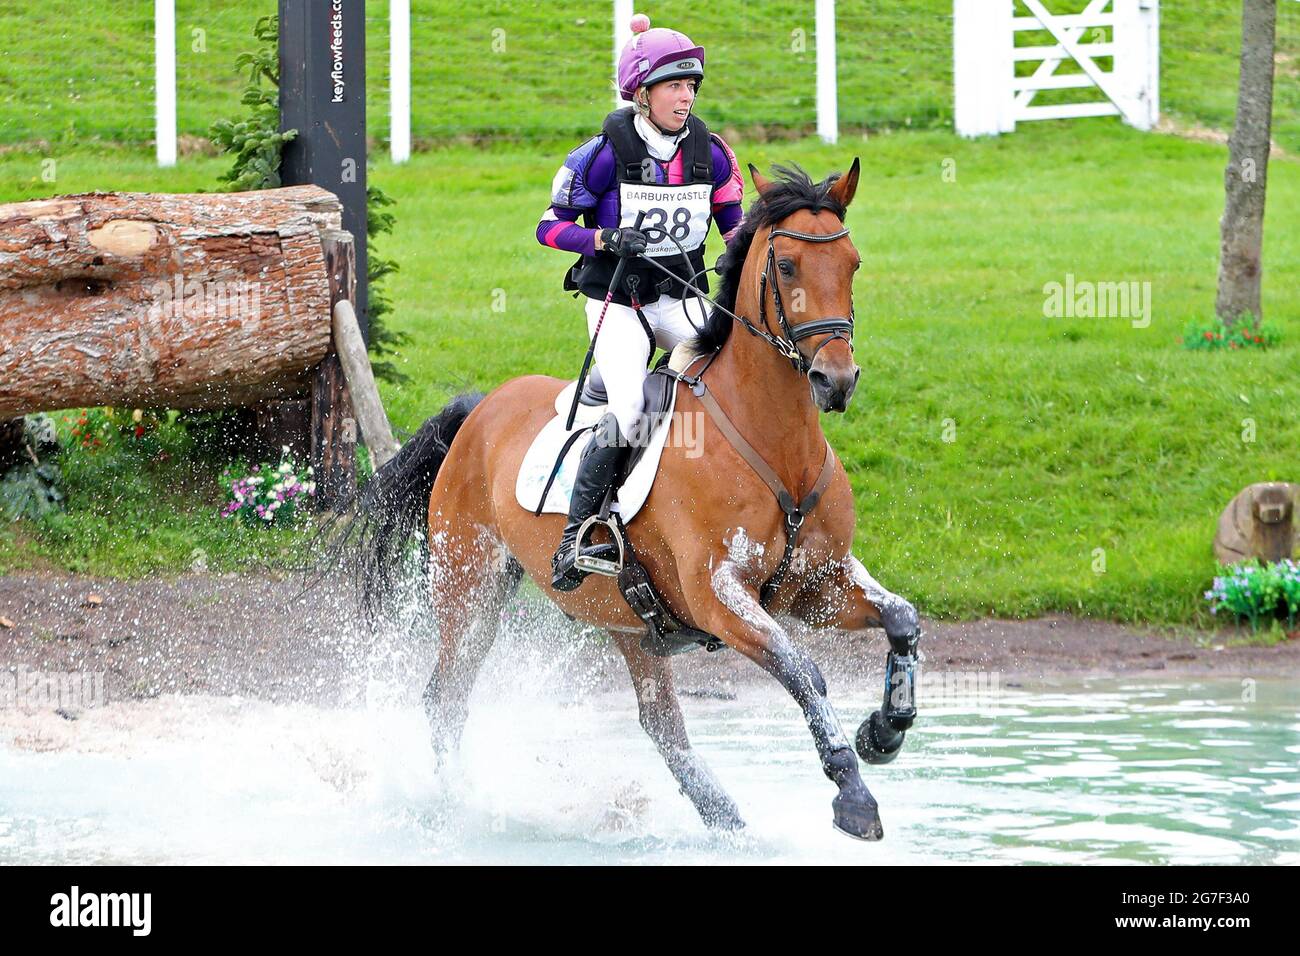 MARLBOROUGH, UK. JULY 11TH. Ginny Howe riding Trendy Captain Clover during 4* Cross Country event at the Barbury Castle International Horse Trials, Marlborough, Wiltshire, UK on Sunday 11th July 2021. (Credit: Jon Bromley | MI News) Credit: MI News & Sport /Alamy Live News Stock Photo